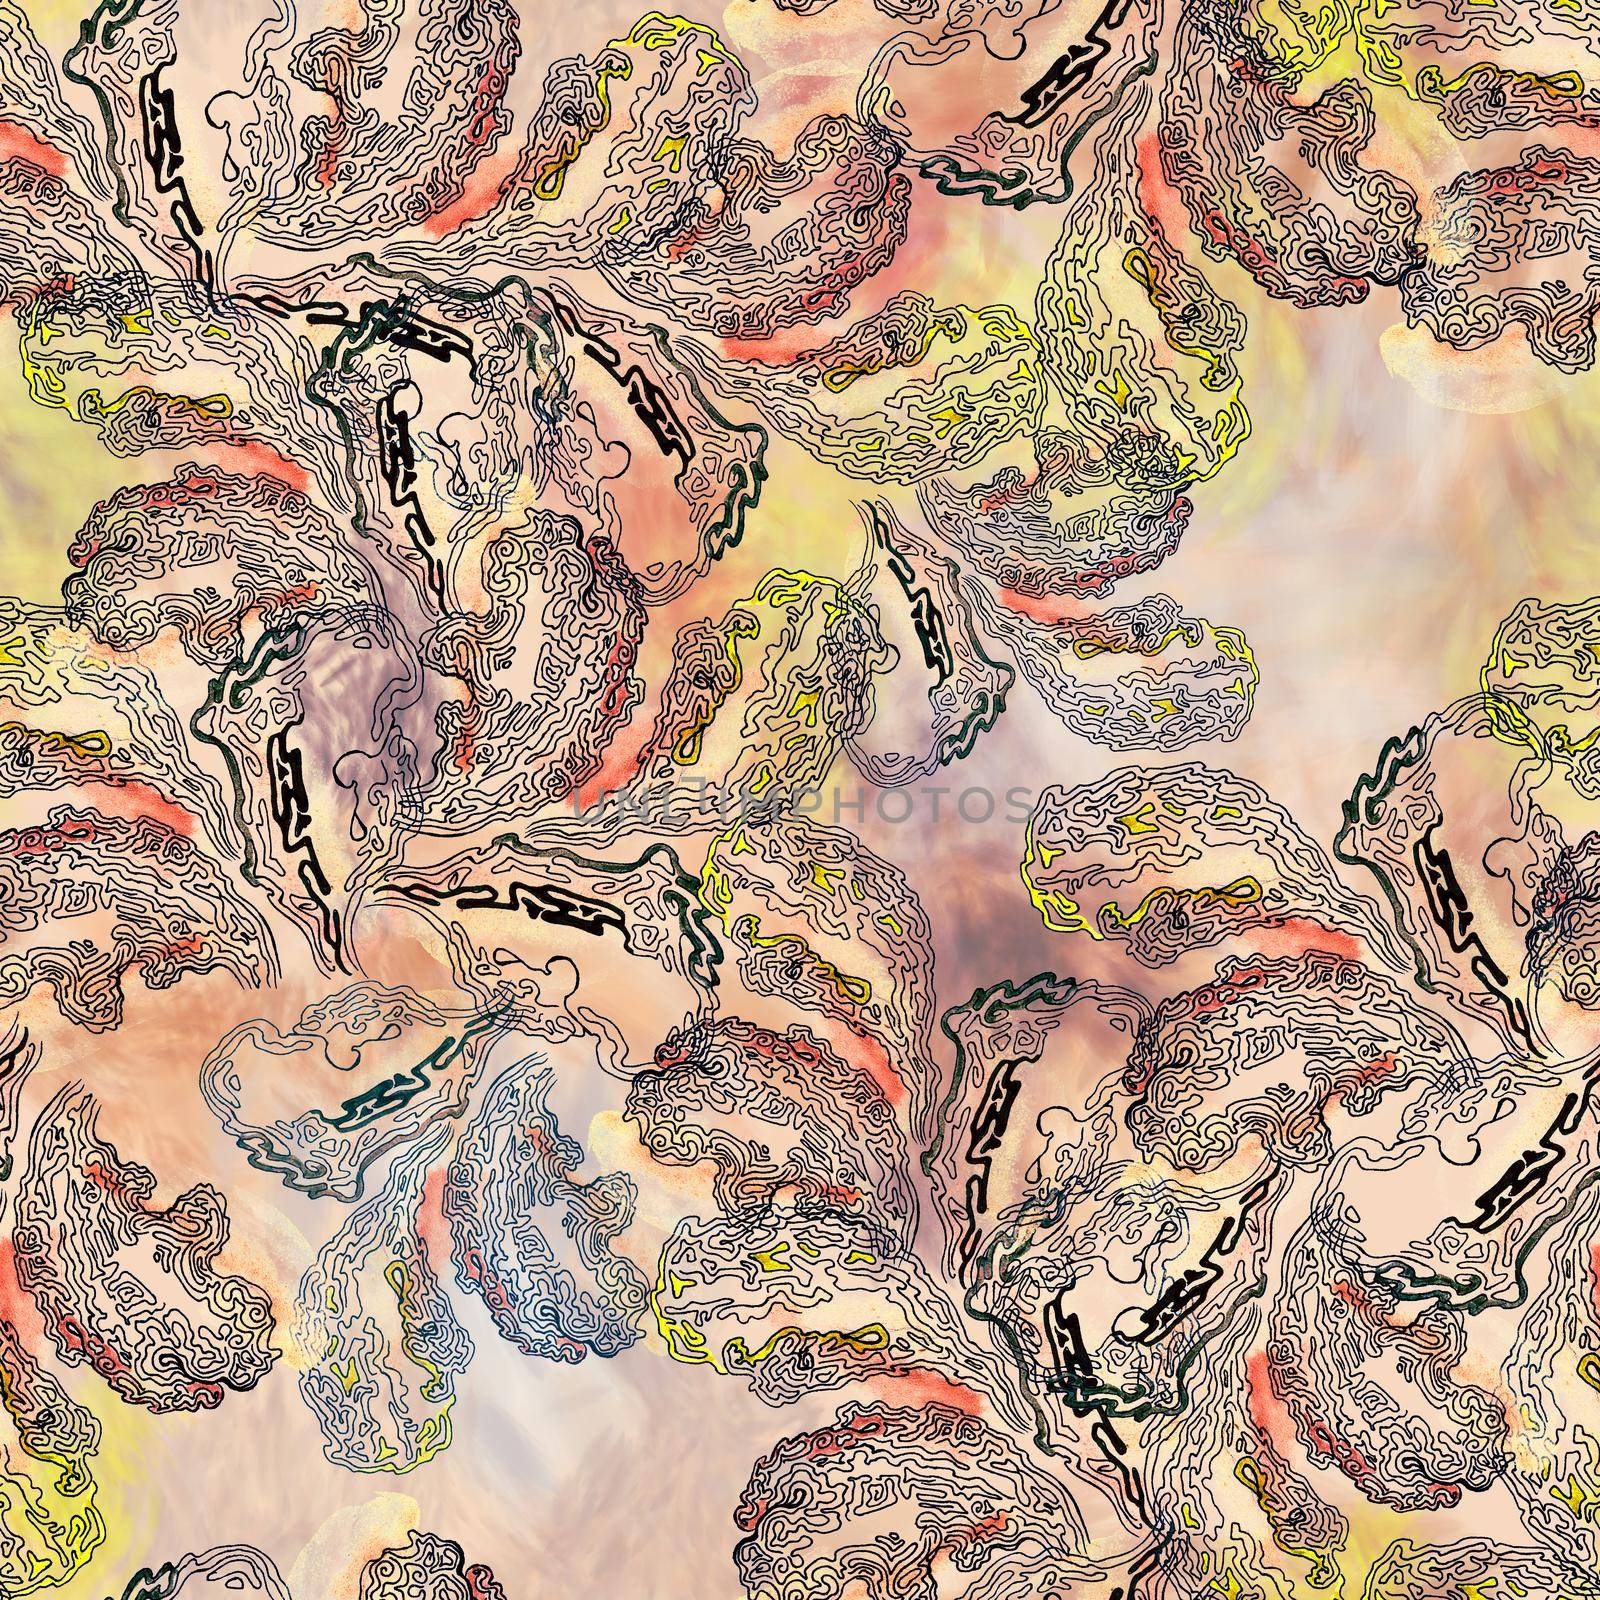 Layered wood fungus texture watercolor and graphic seamless pattern. Hand drawn illustration by fireFLYart